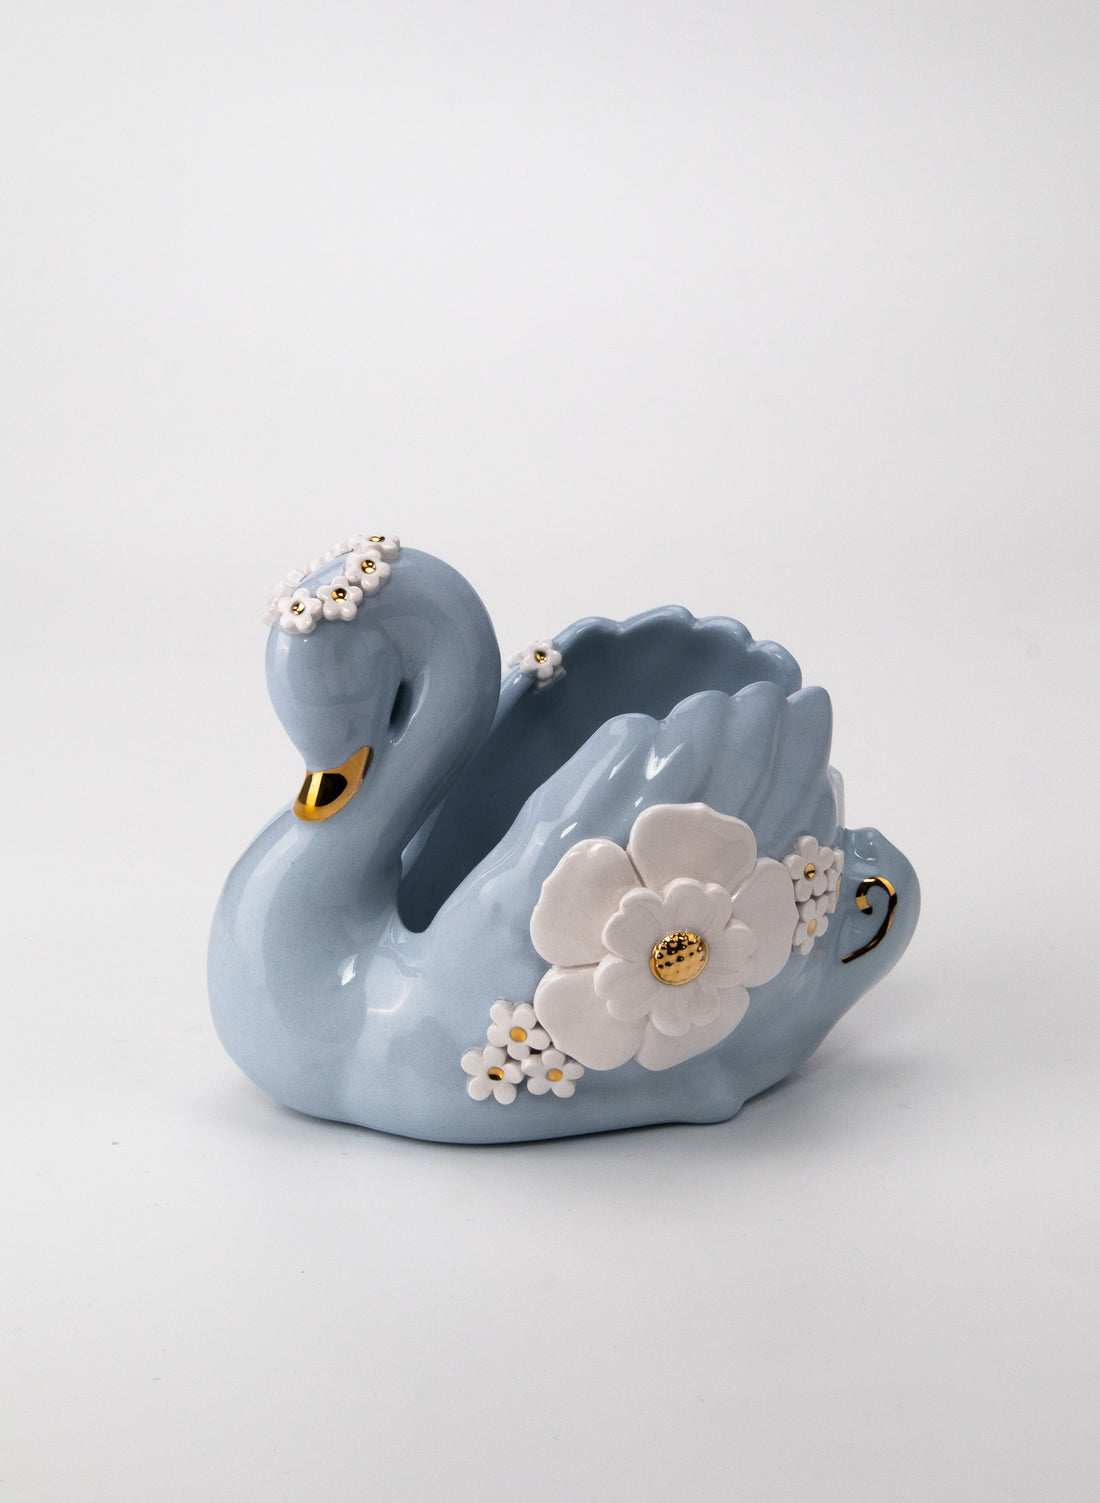 Medium Blue Swan with Gold and White Flowers